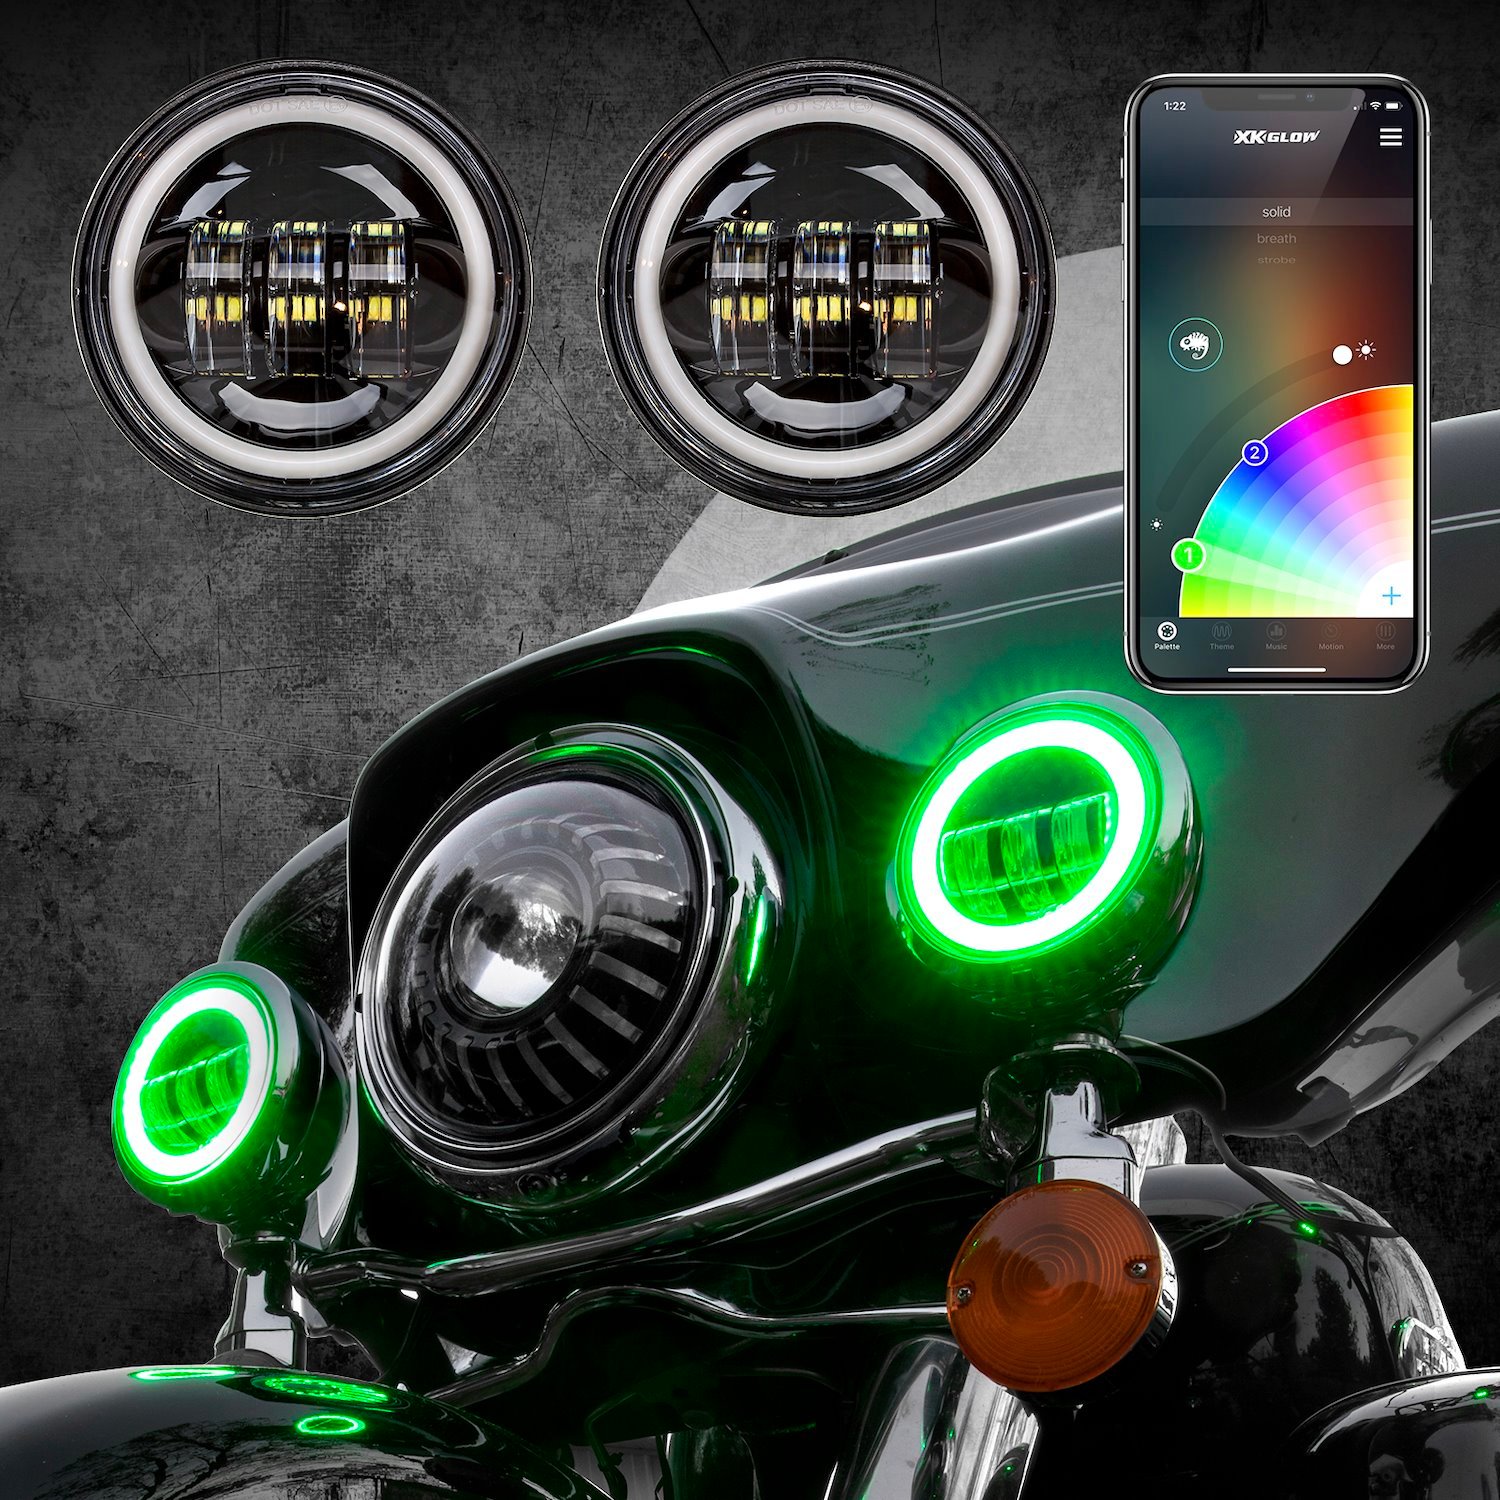 XK042011-B 4.5 in. Black RGB LED Running Light Kit, for Harley Motorcycle, w/ XKCHROME Bluetooth App Control, Universal Fit